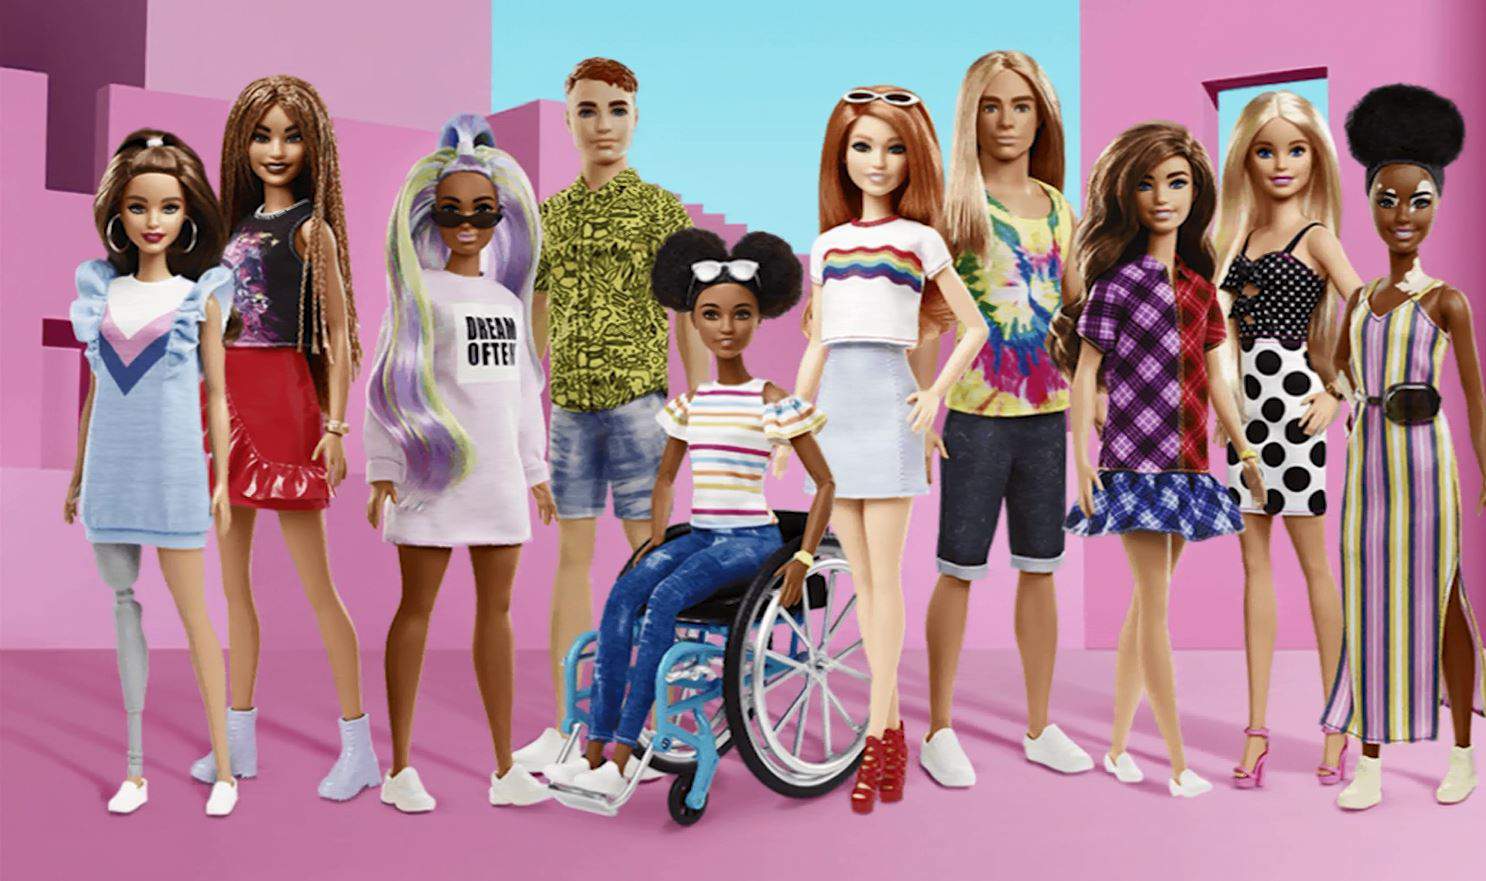 Prosthetic limbs, wheelchairs, no hair: New Barbies reflect diverse customers